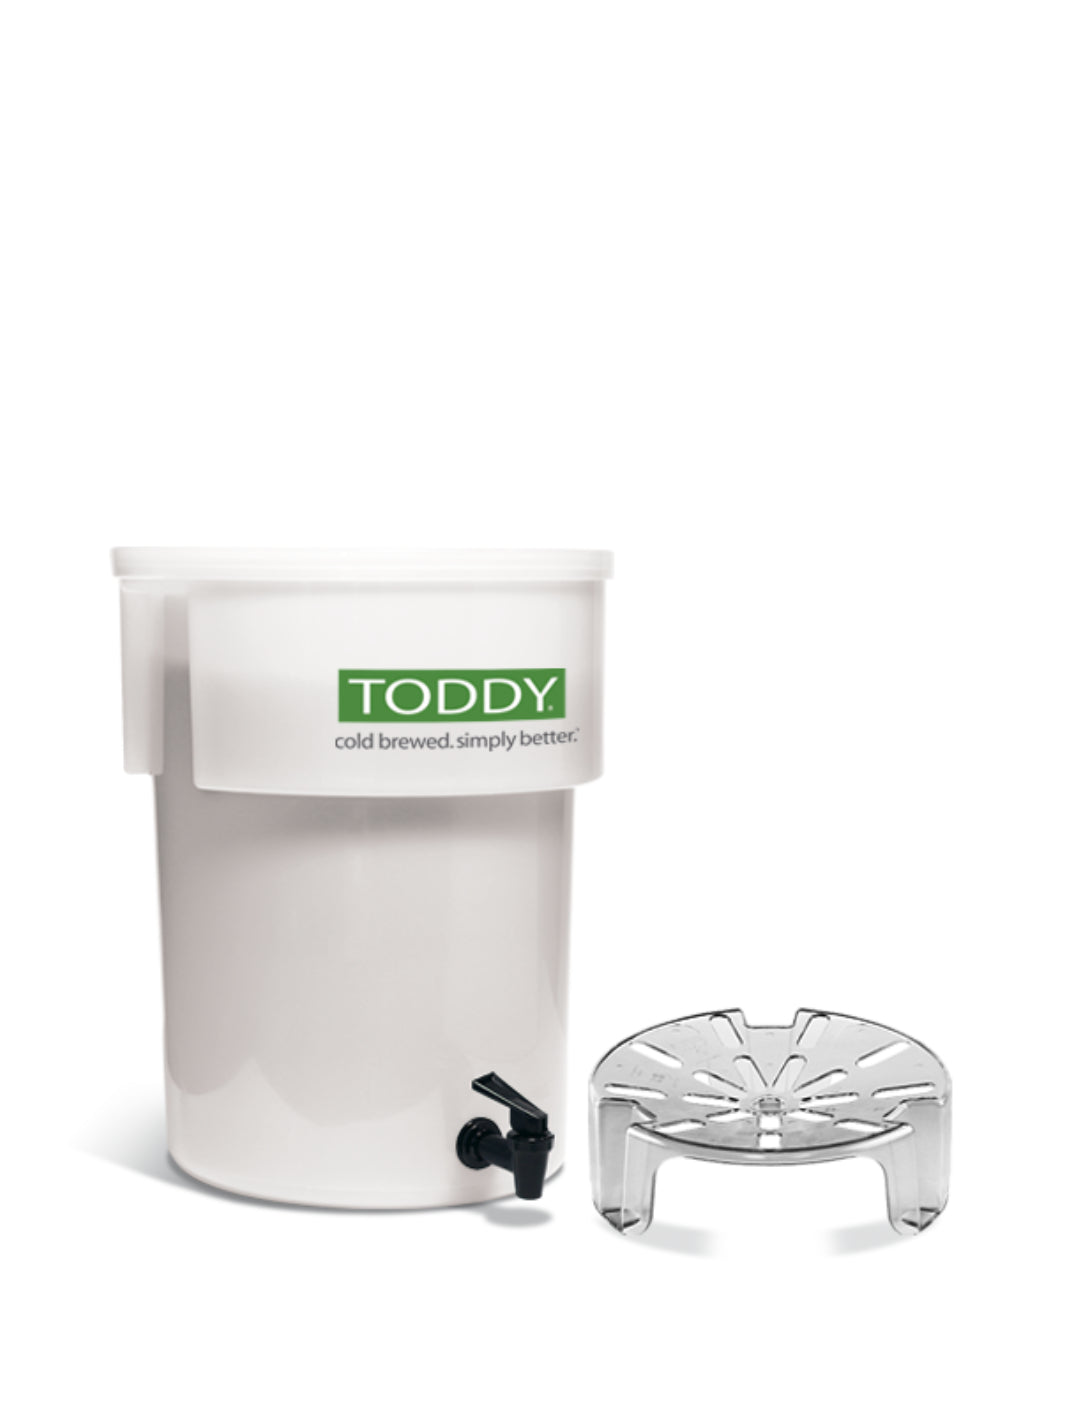 The Best Cold Brewer: Hario vs Kinto vs Toddy